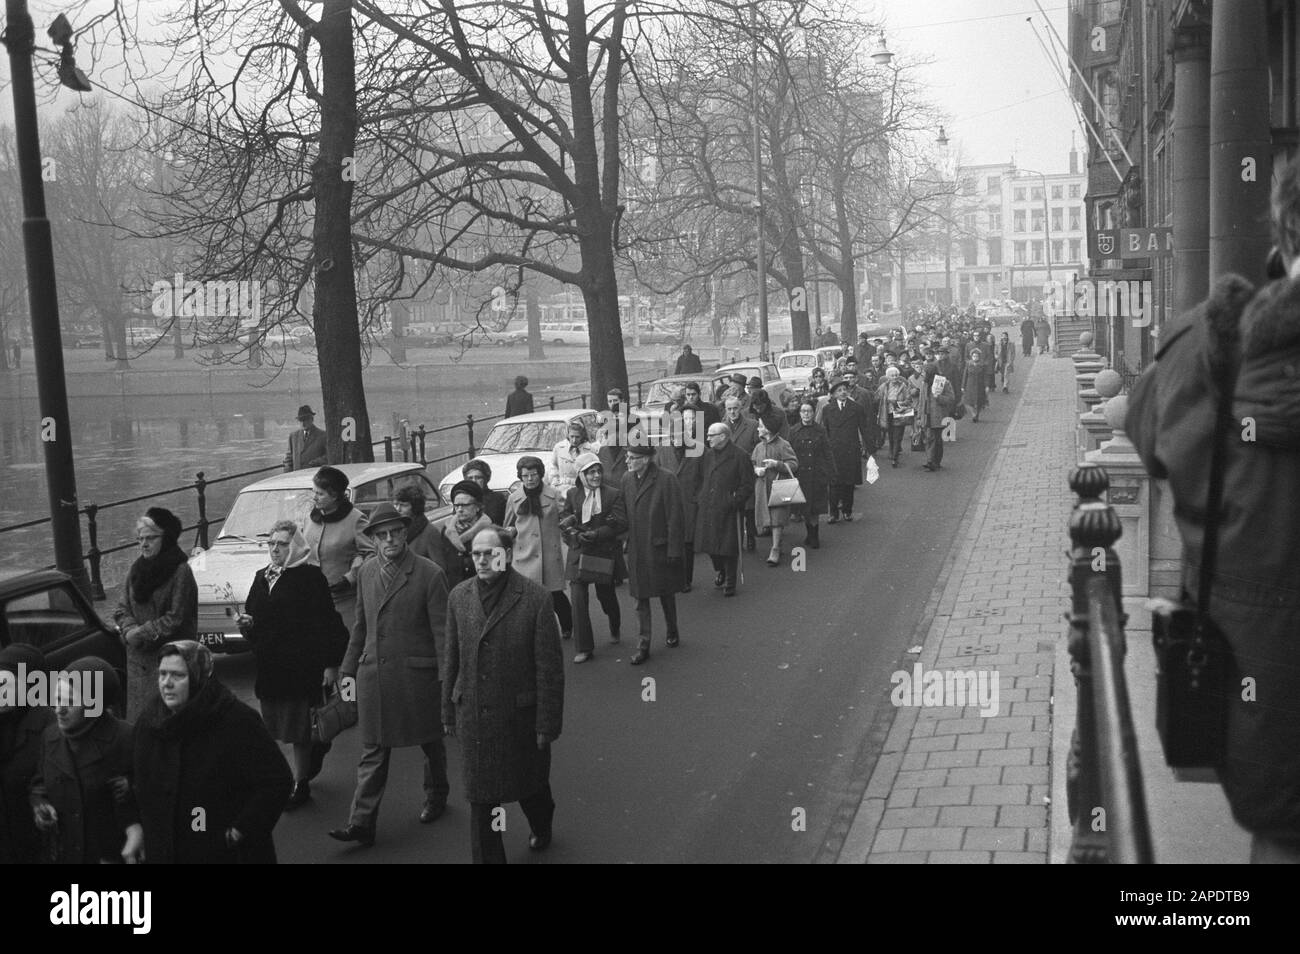 Anti-abortus march in The Hague, protesters Date: January 22, 1972 Location: The Hague, Zuid-Holland Keywords: protestmarsen Stock Photo